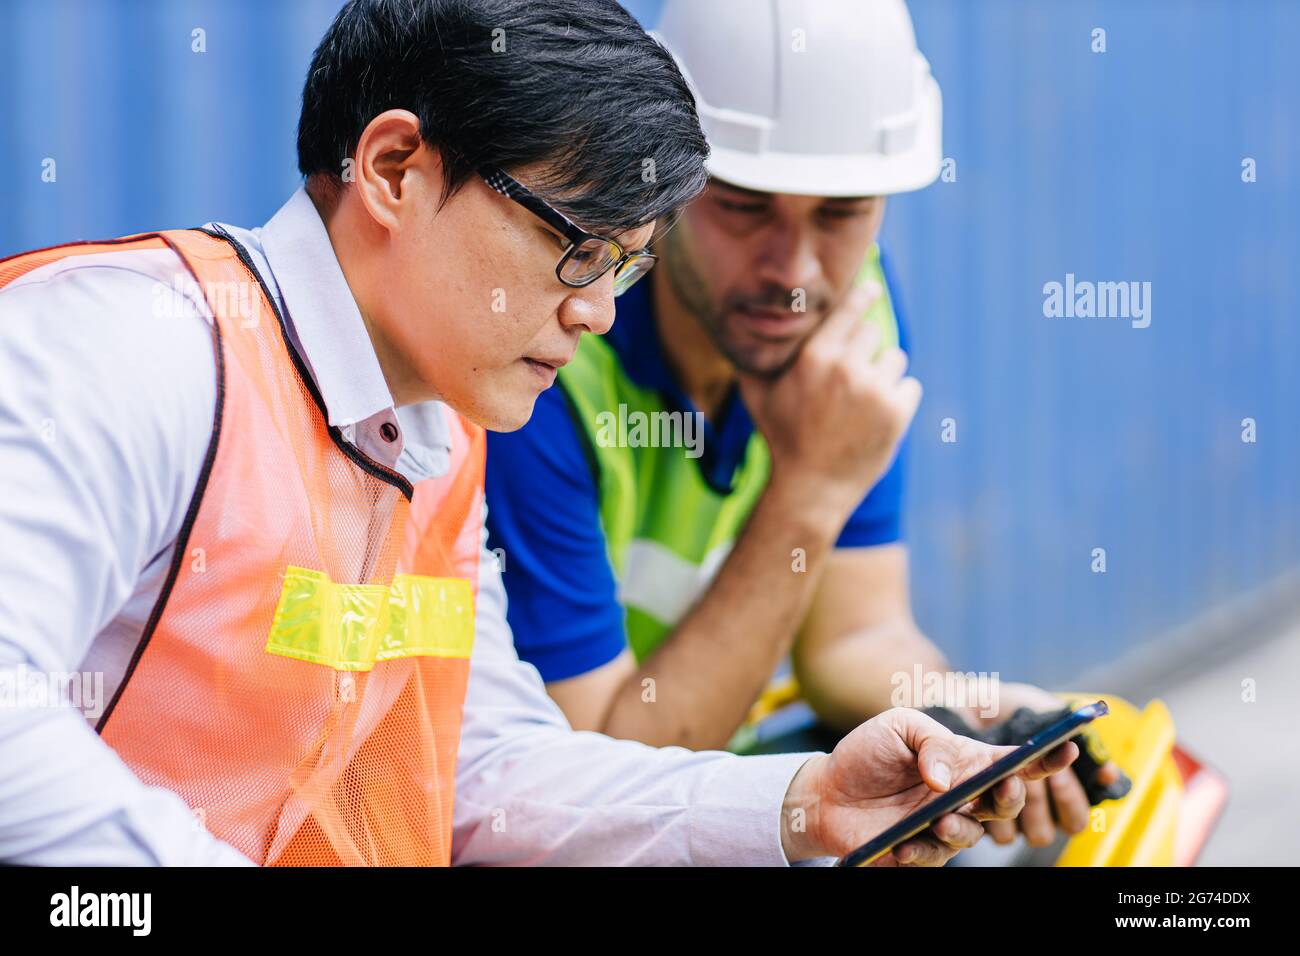 Workers closely monitor Covid breaking news on the phone. People reading and update new information from social media in real time on smartphone serio Stock Photo